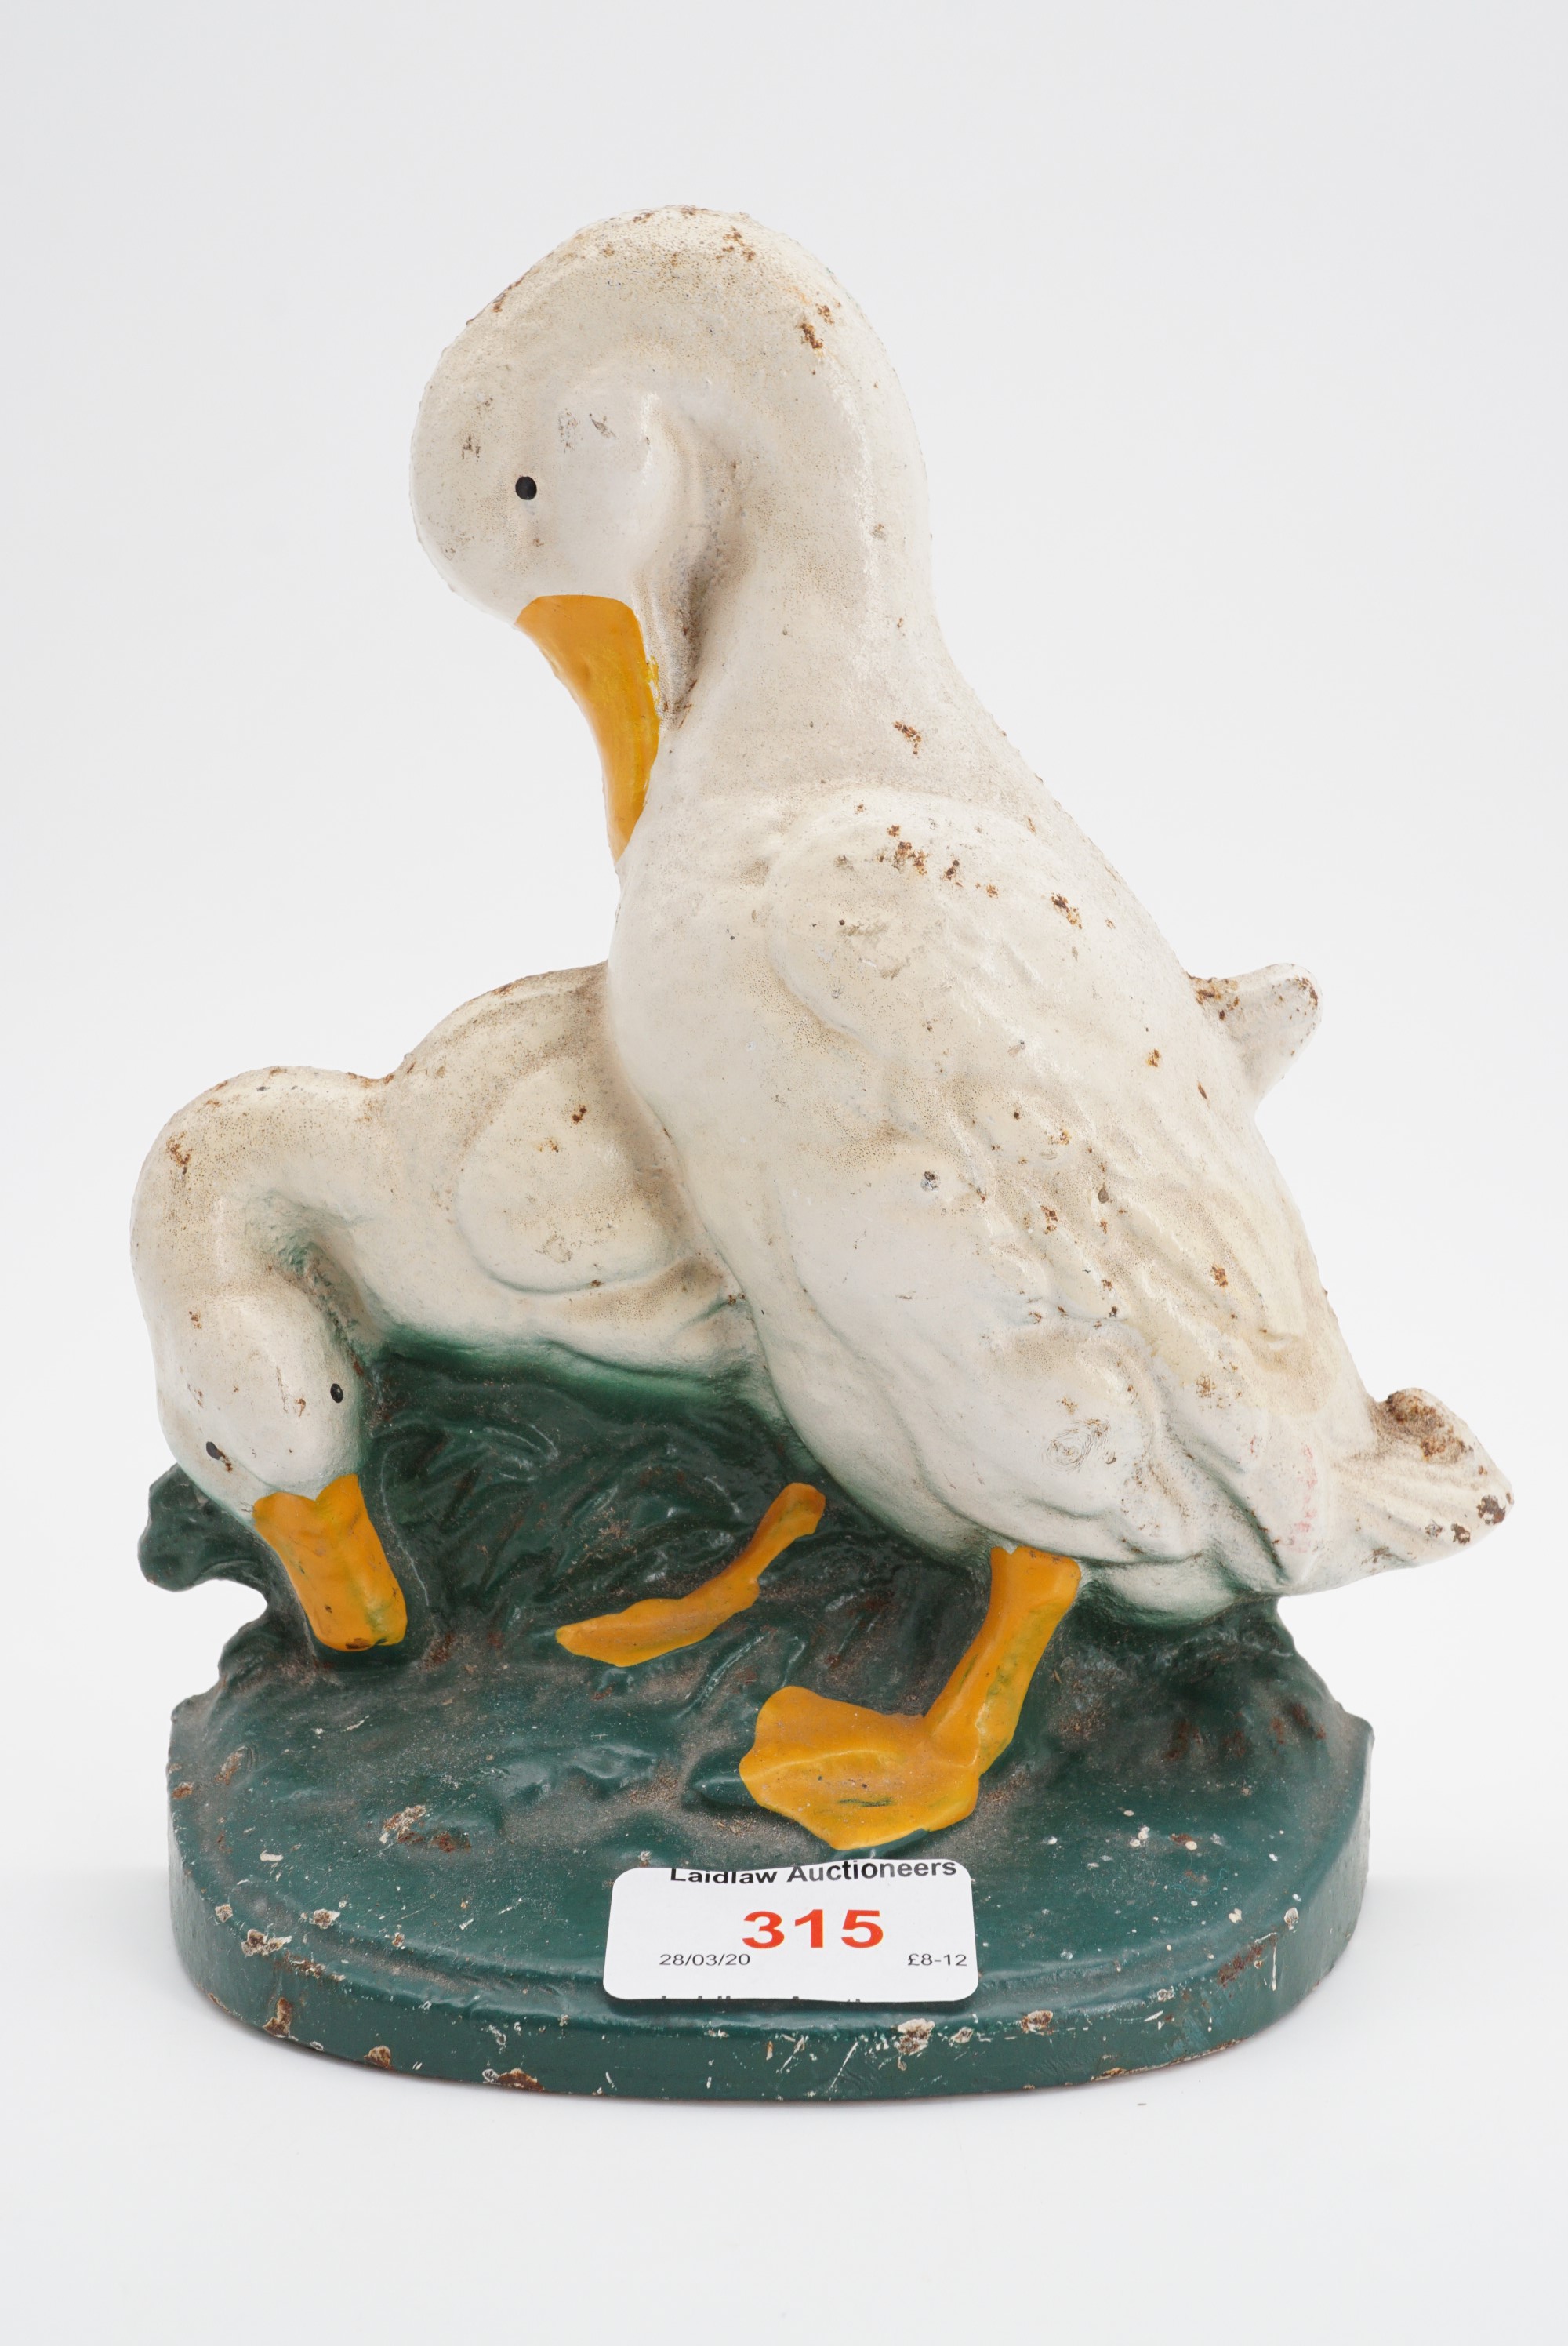 An enamelled cast iron door stop modelled as geese, 19 cm